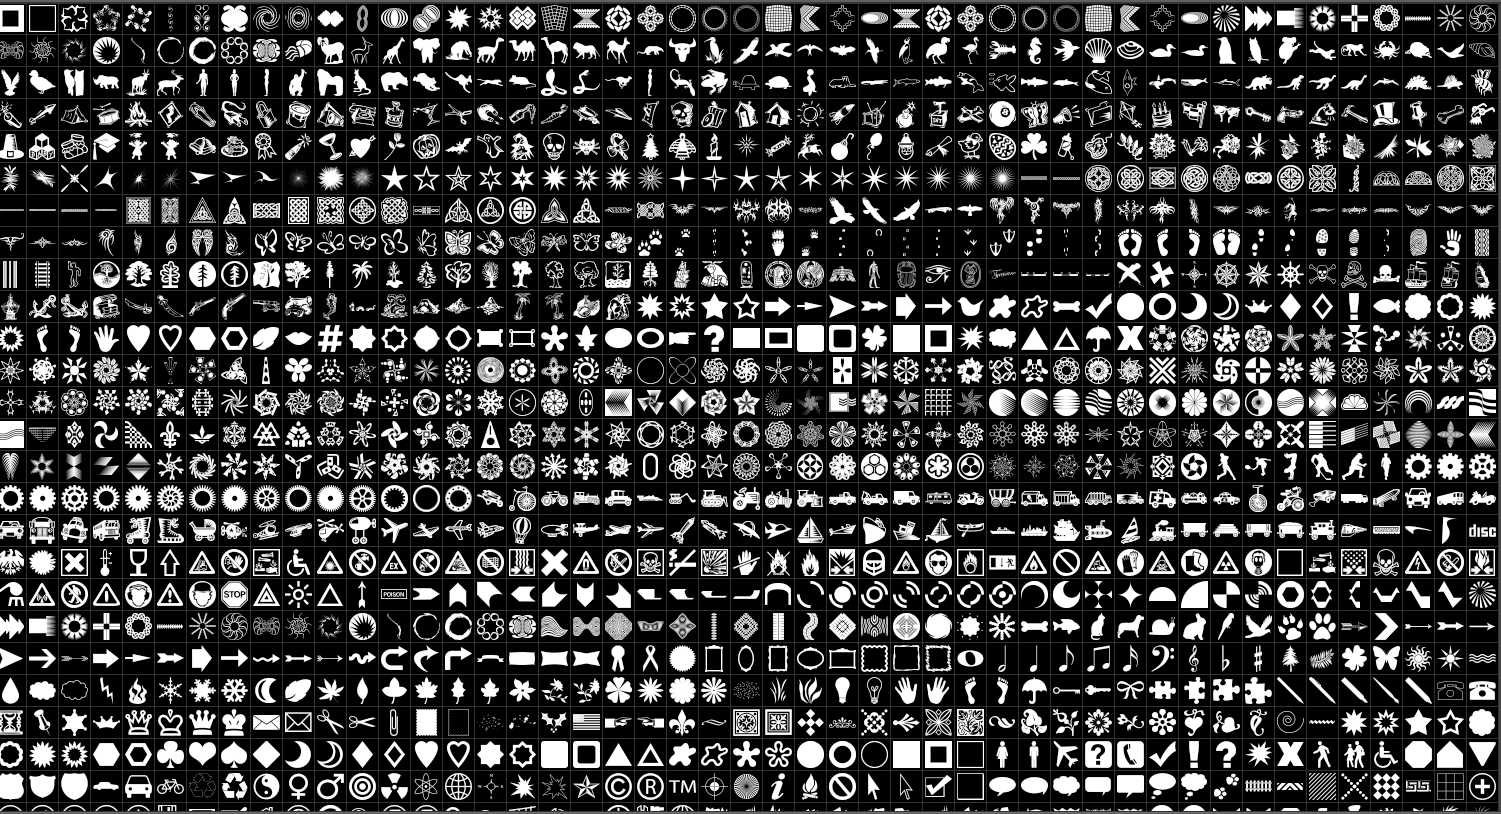 Download shapes for Photoshop 1190 shapes in one batch